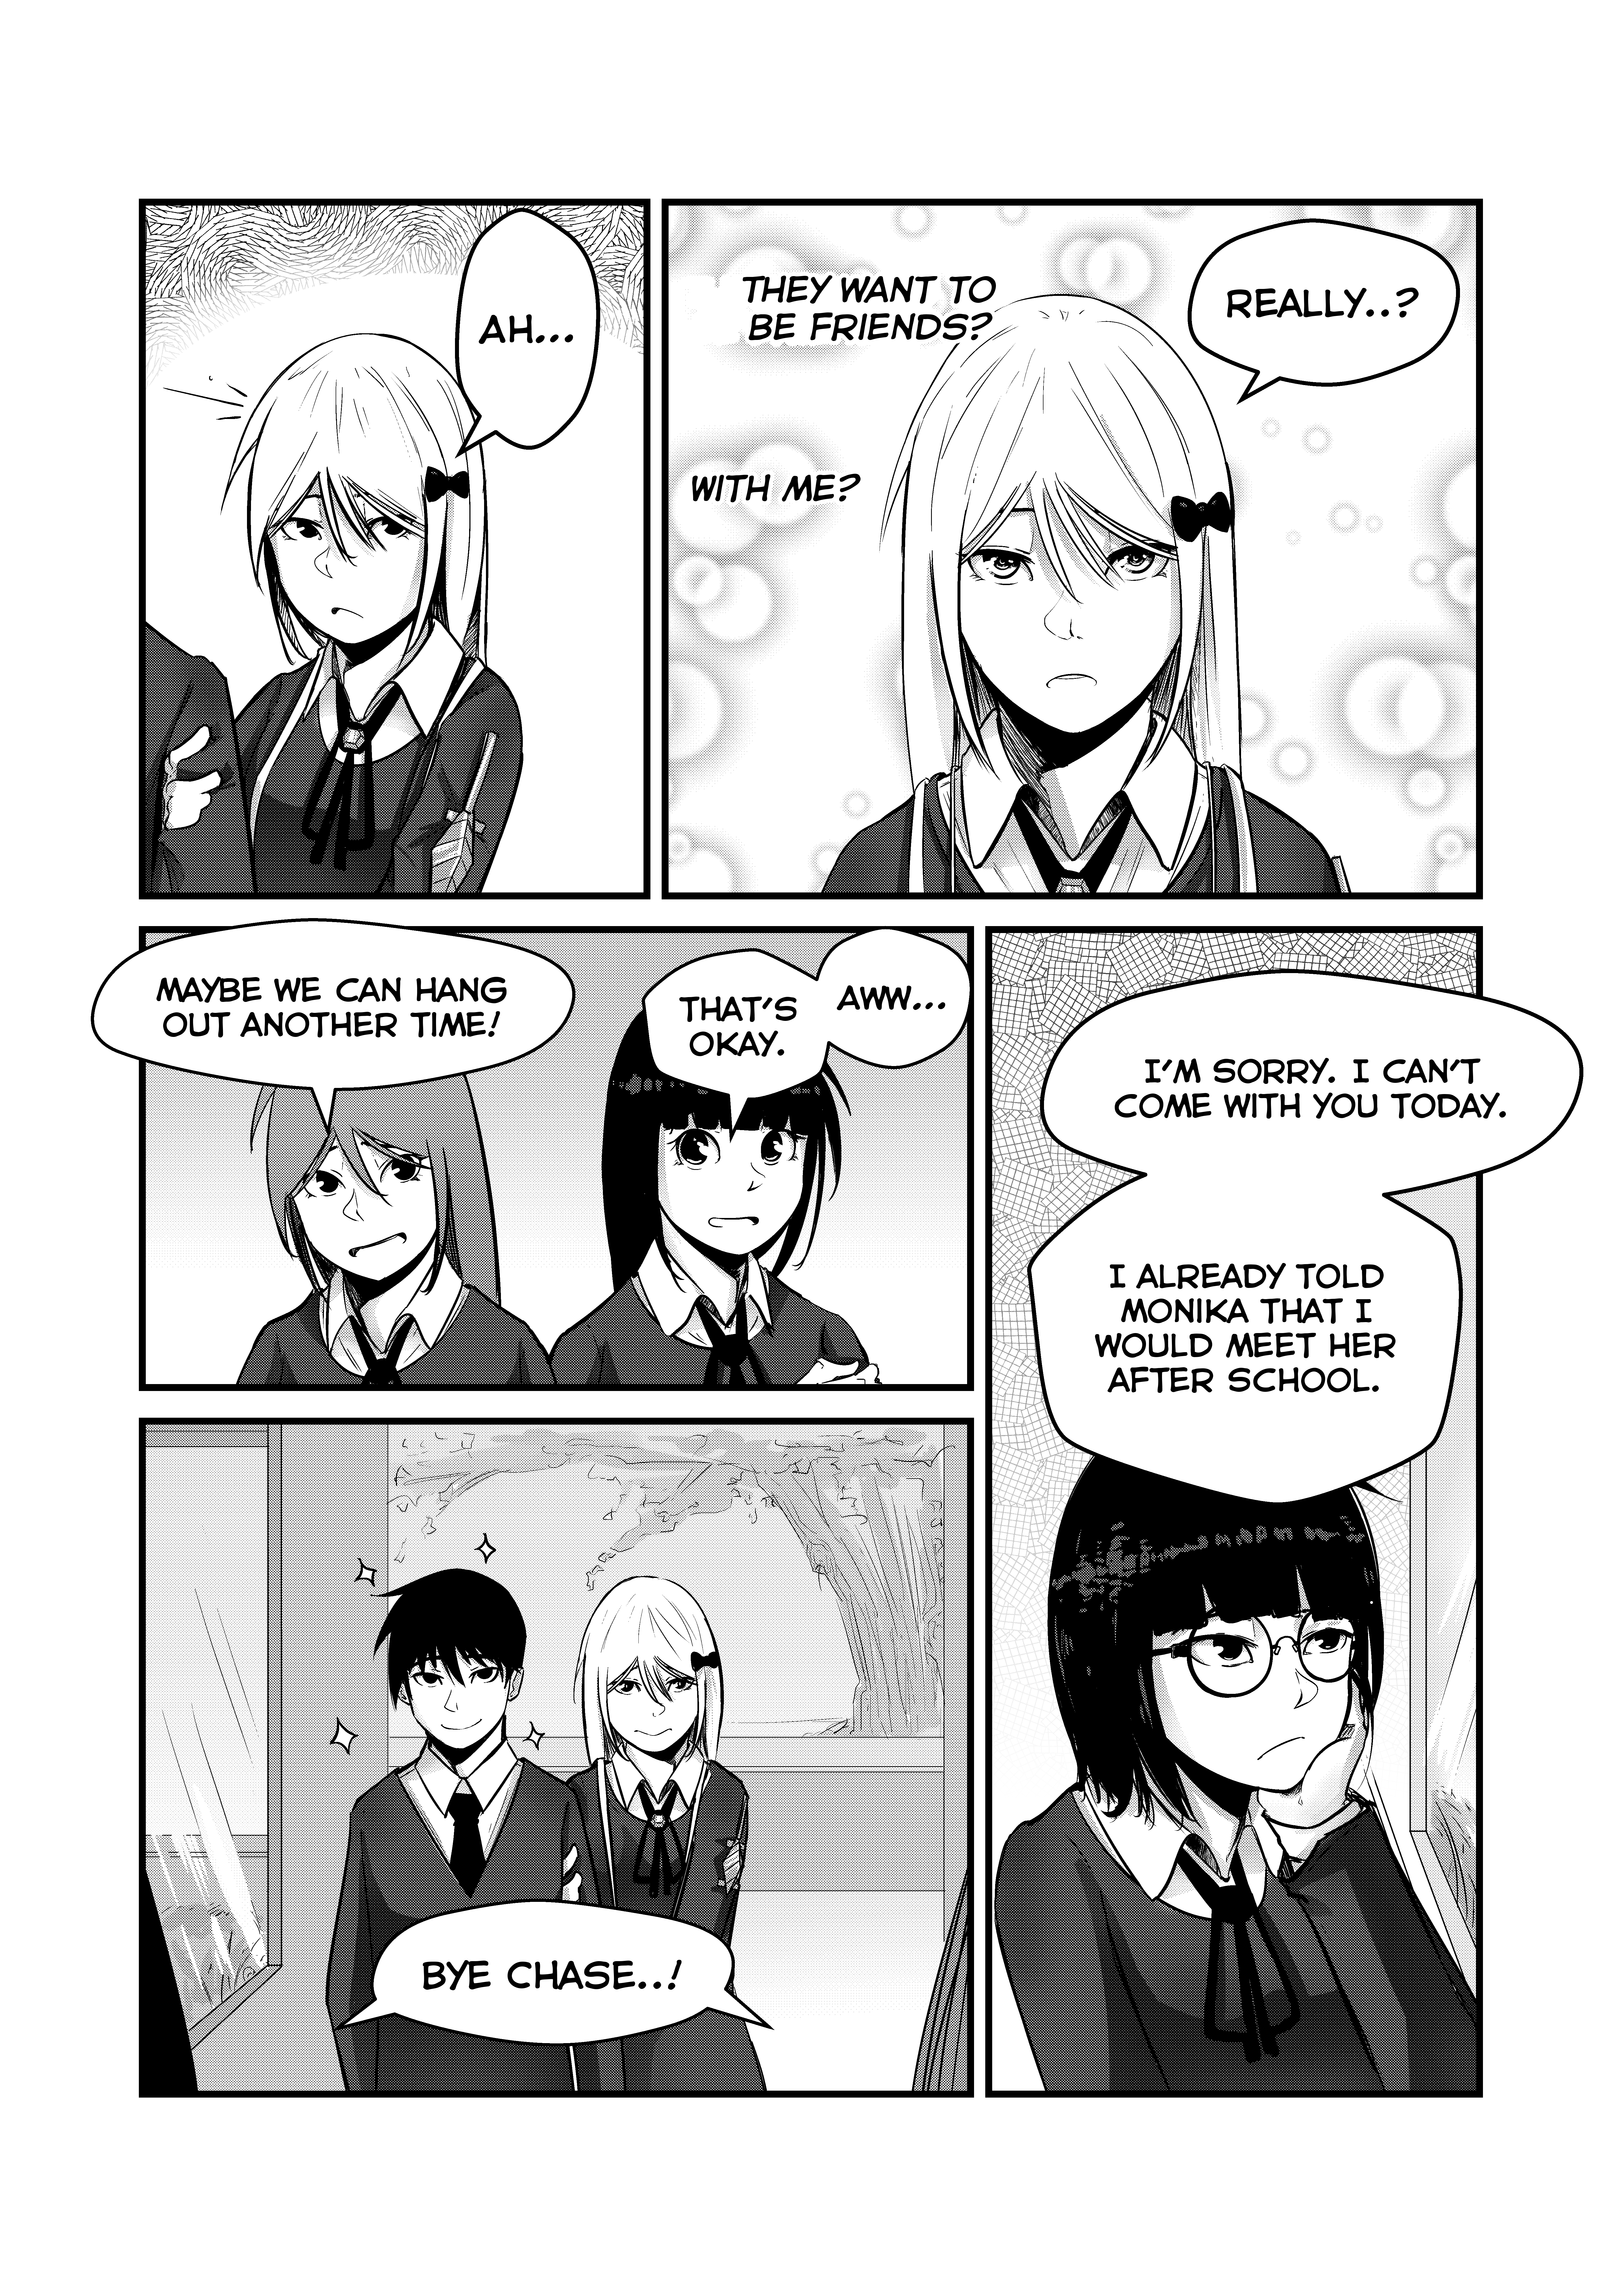 Opposites In Disguise - 5 page 9